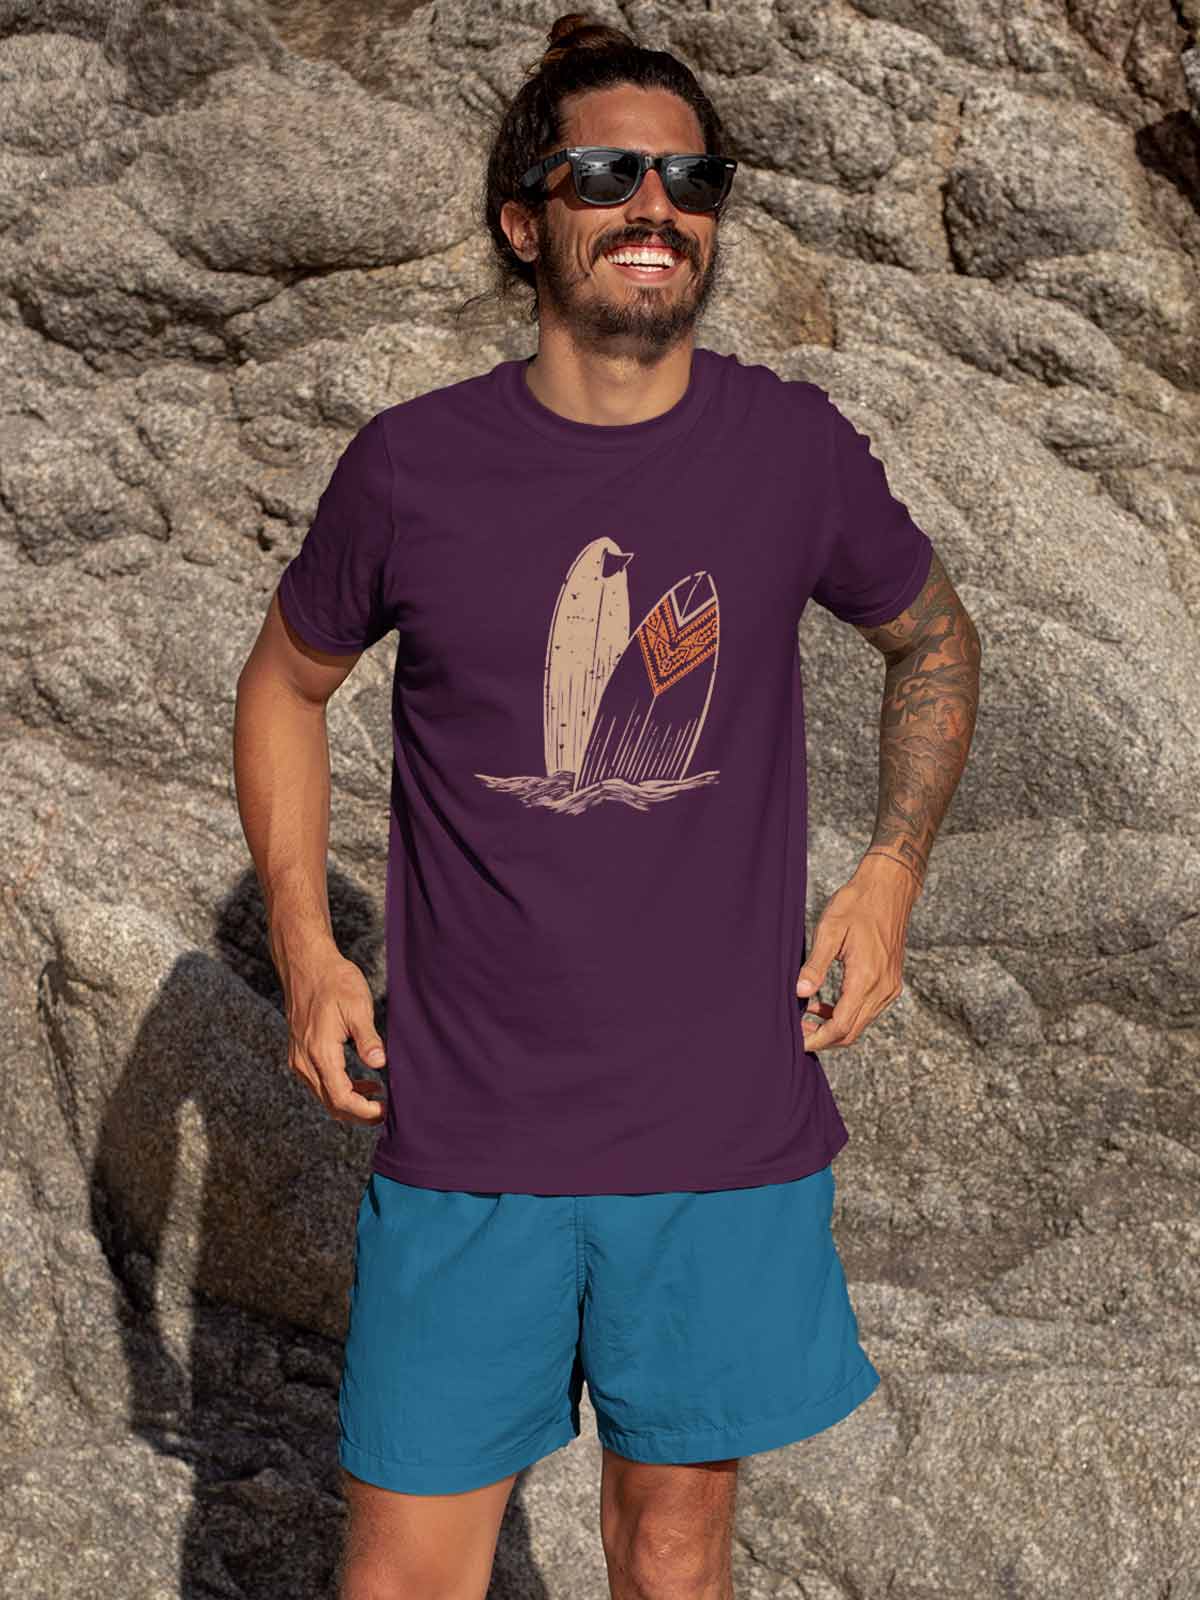 Surfboard-printed-t-shirt-for-men by Ghumakkad